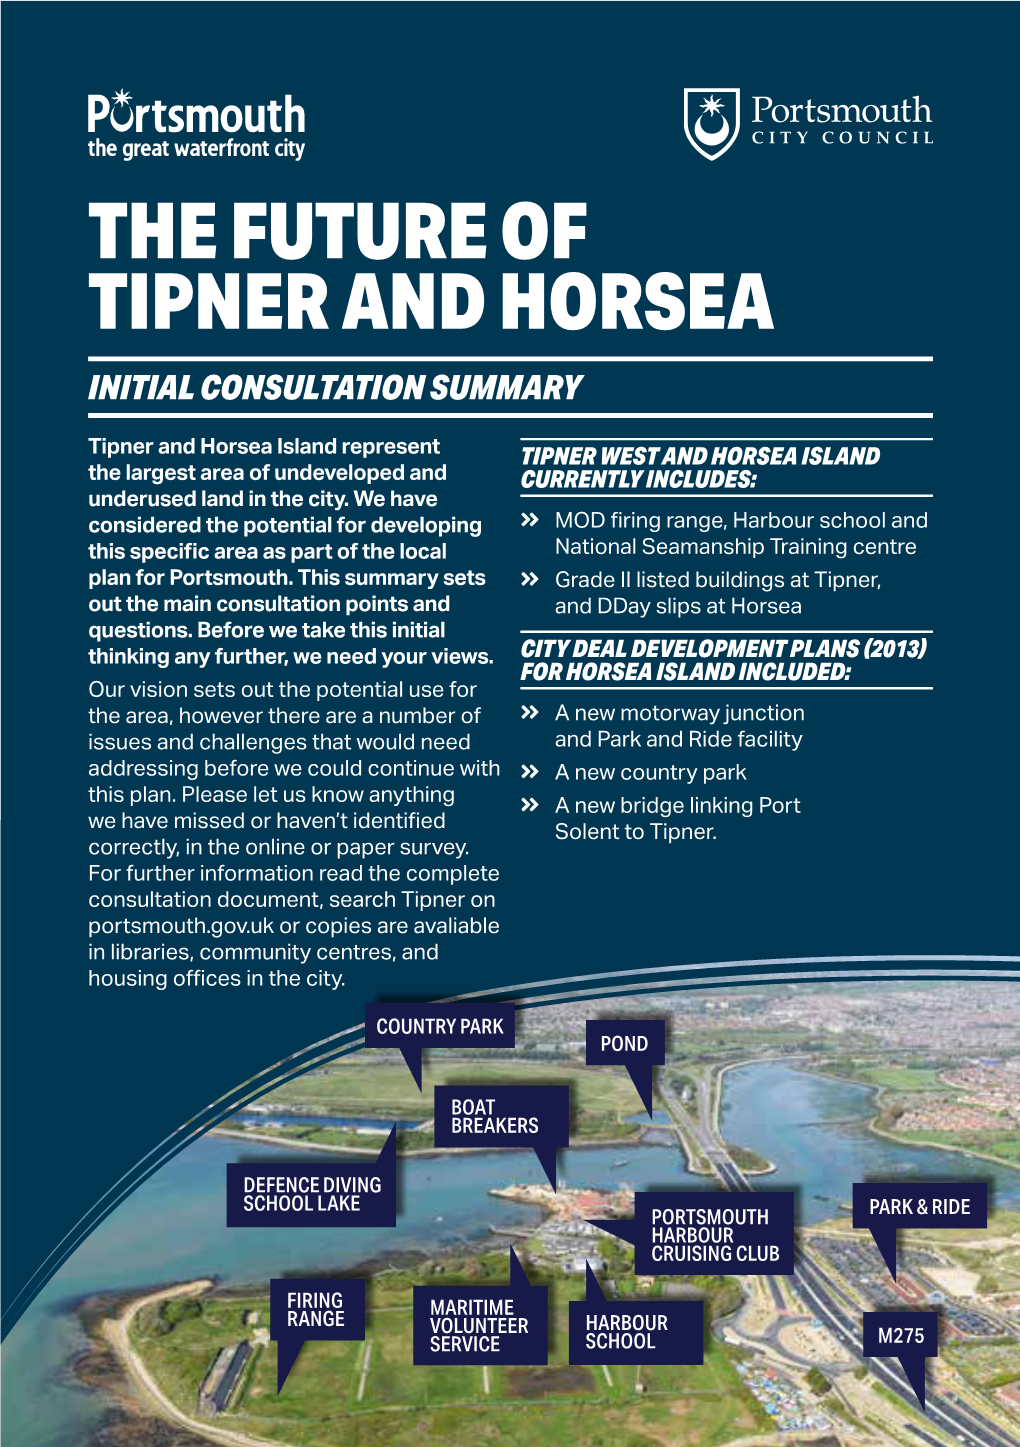 The Future of Tipner and Horsea Initial Consultation Summary